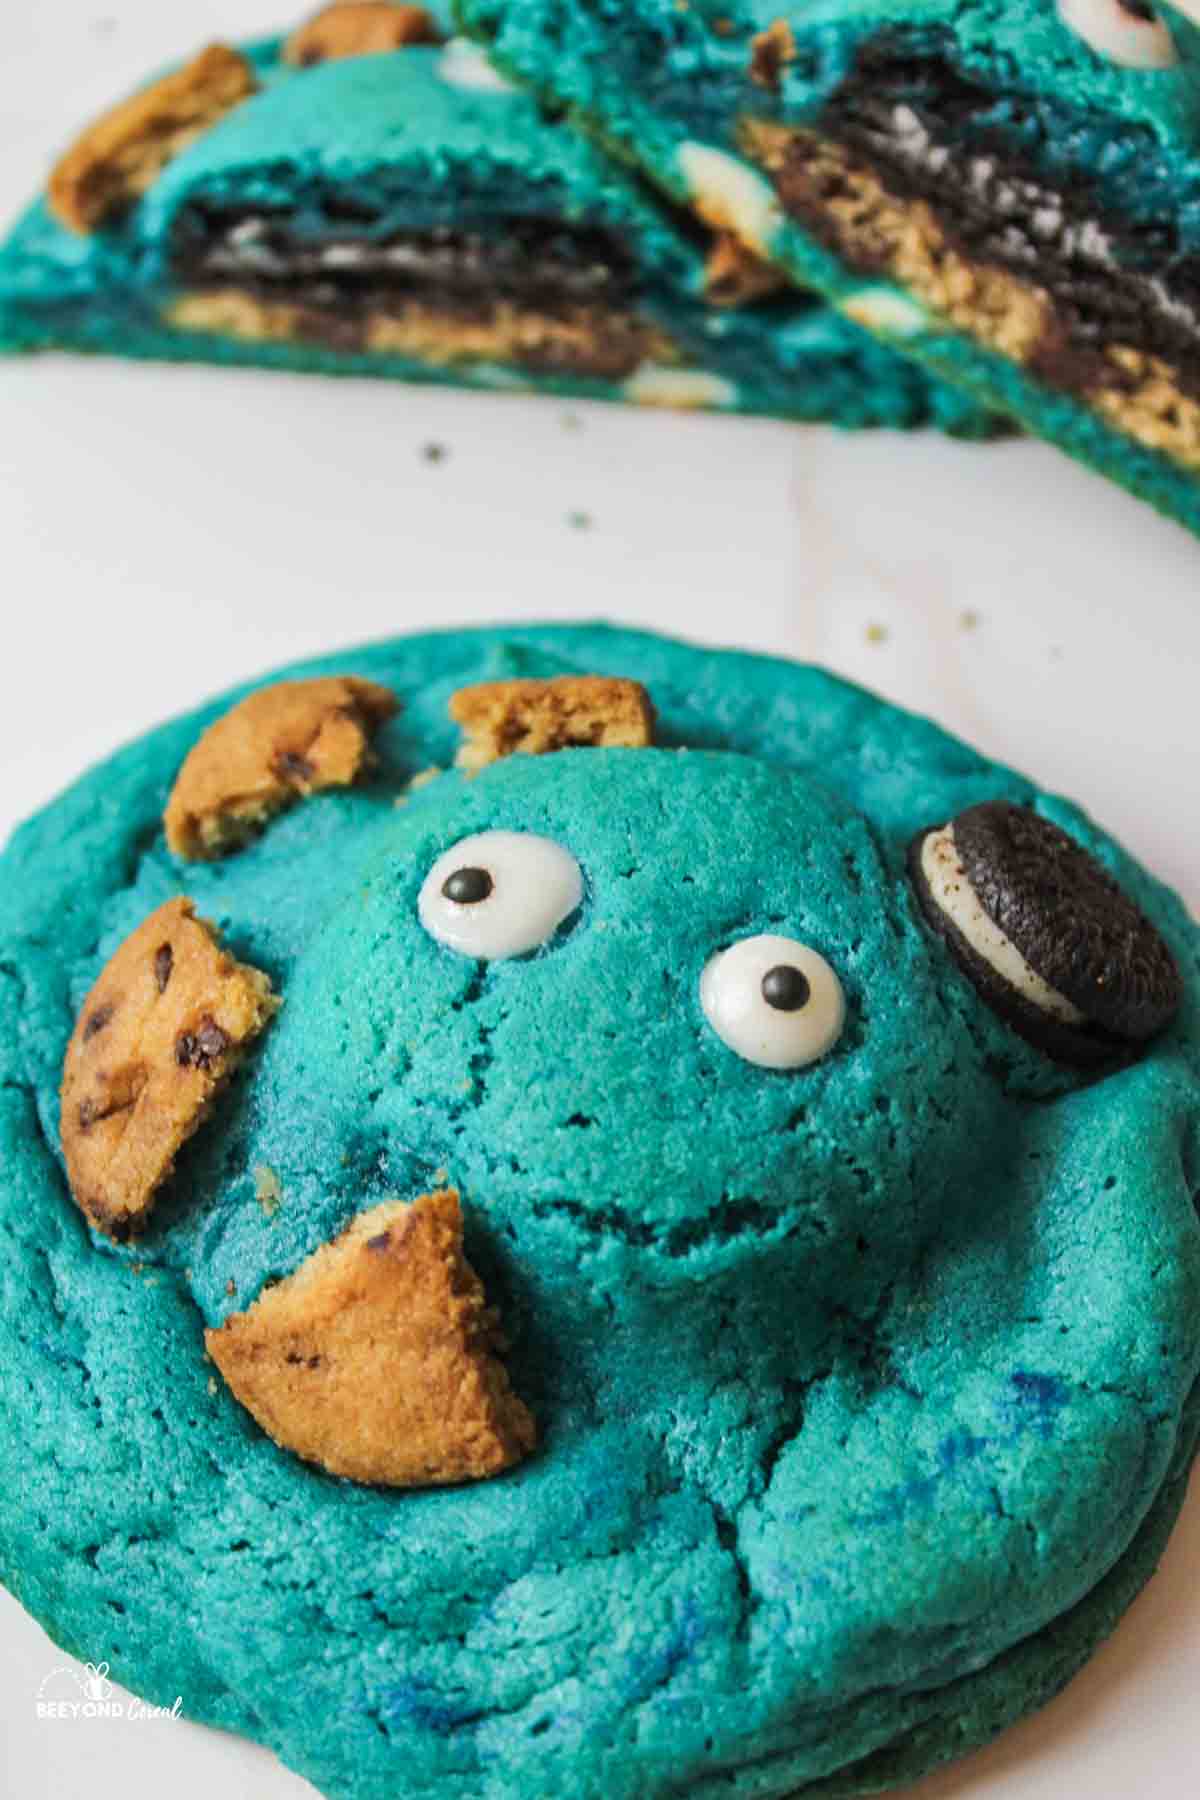 an upclose view of a blue cookie with candy eyes and cookie pieces on top